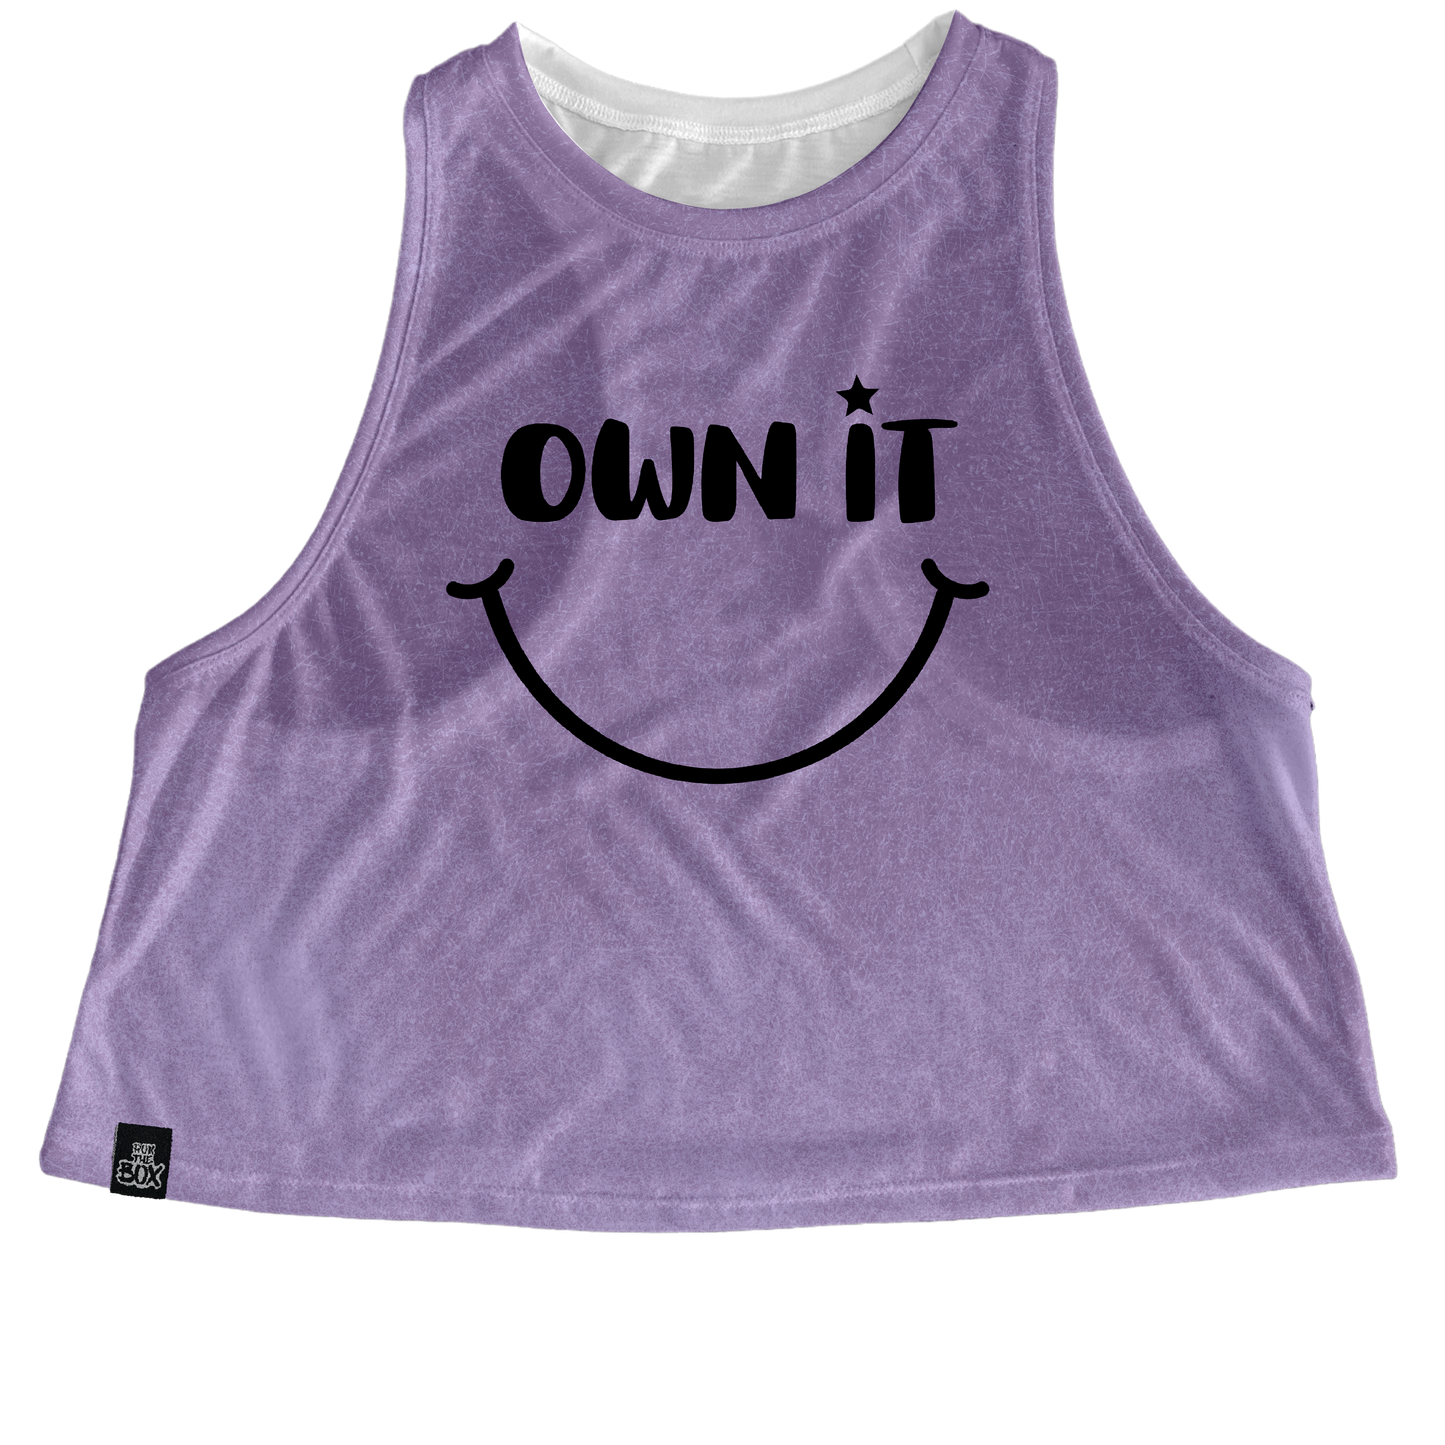 OWN IT (lavender) Tops